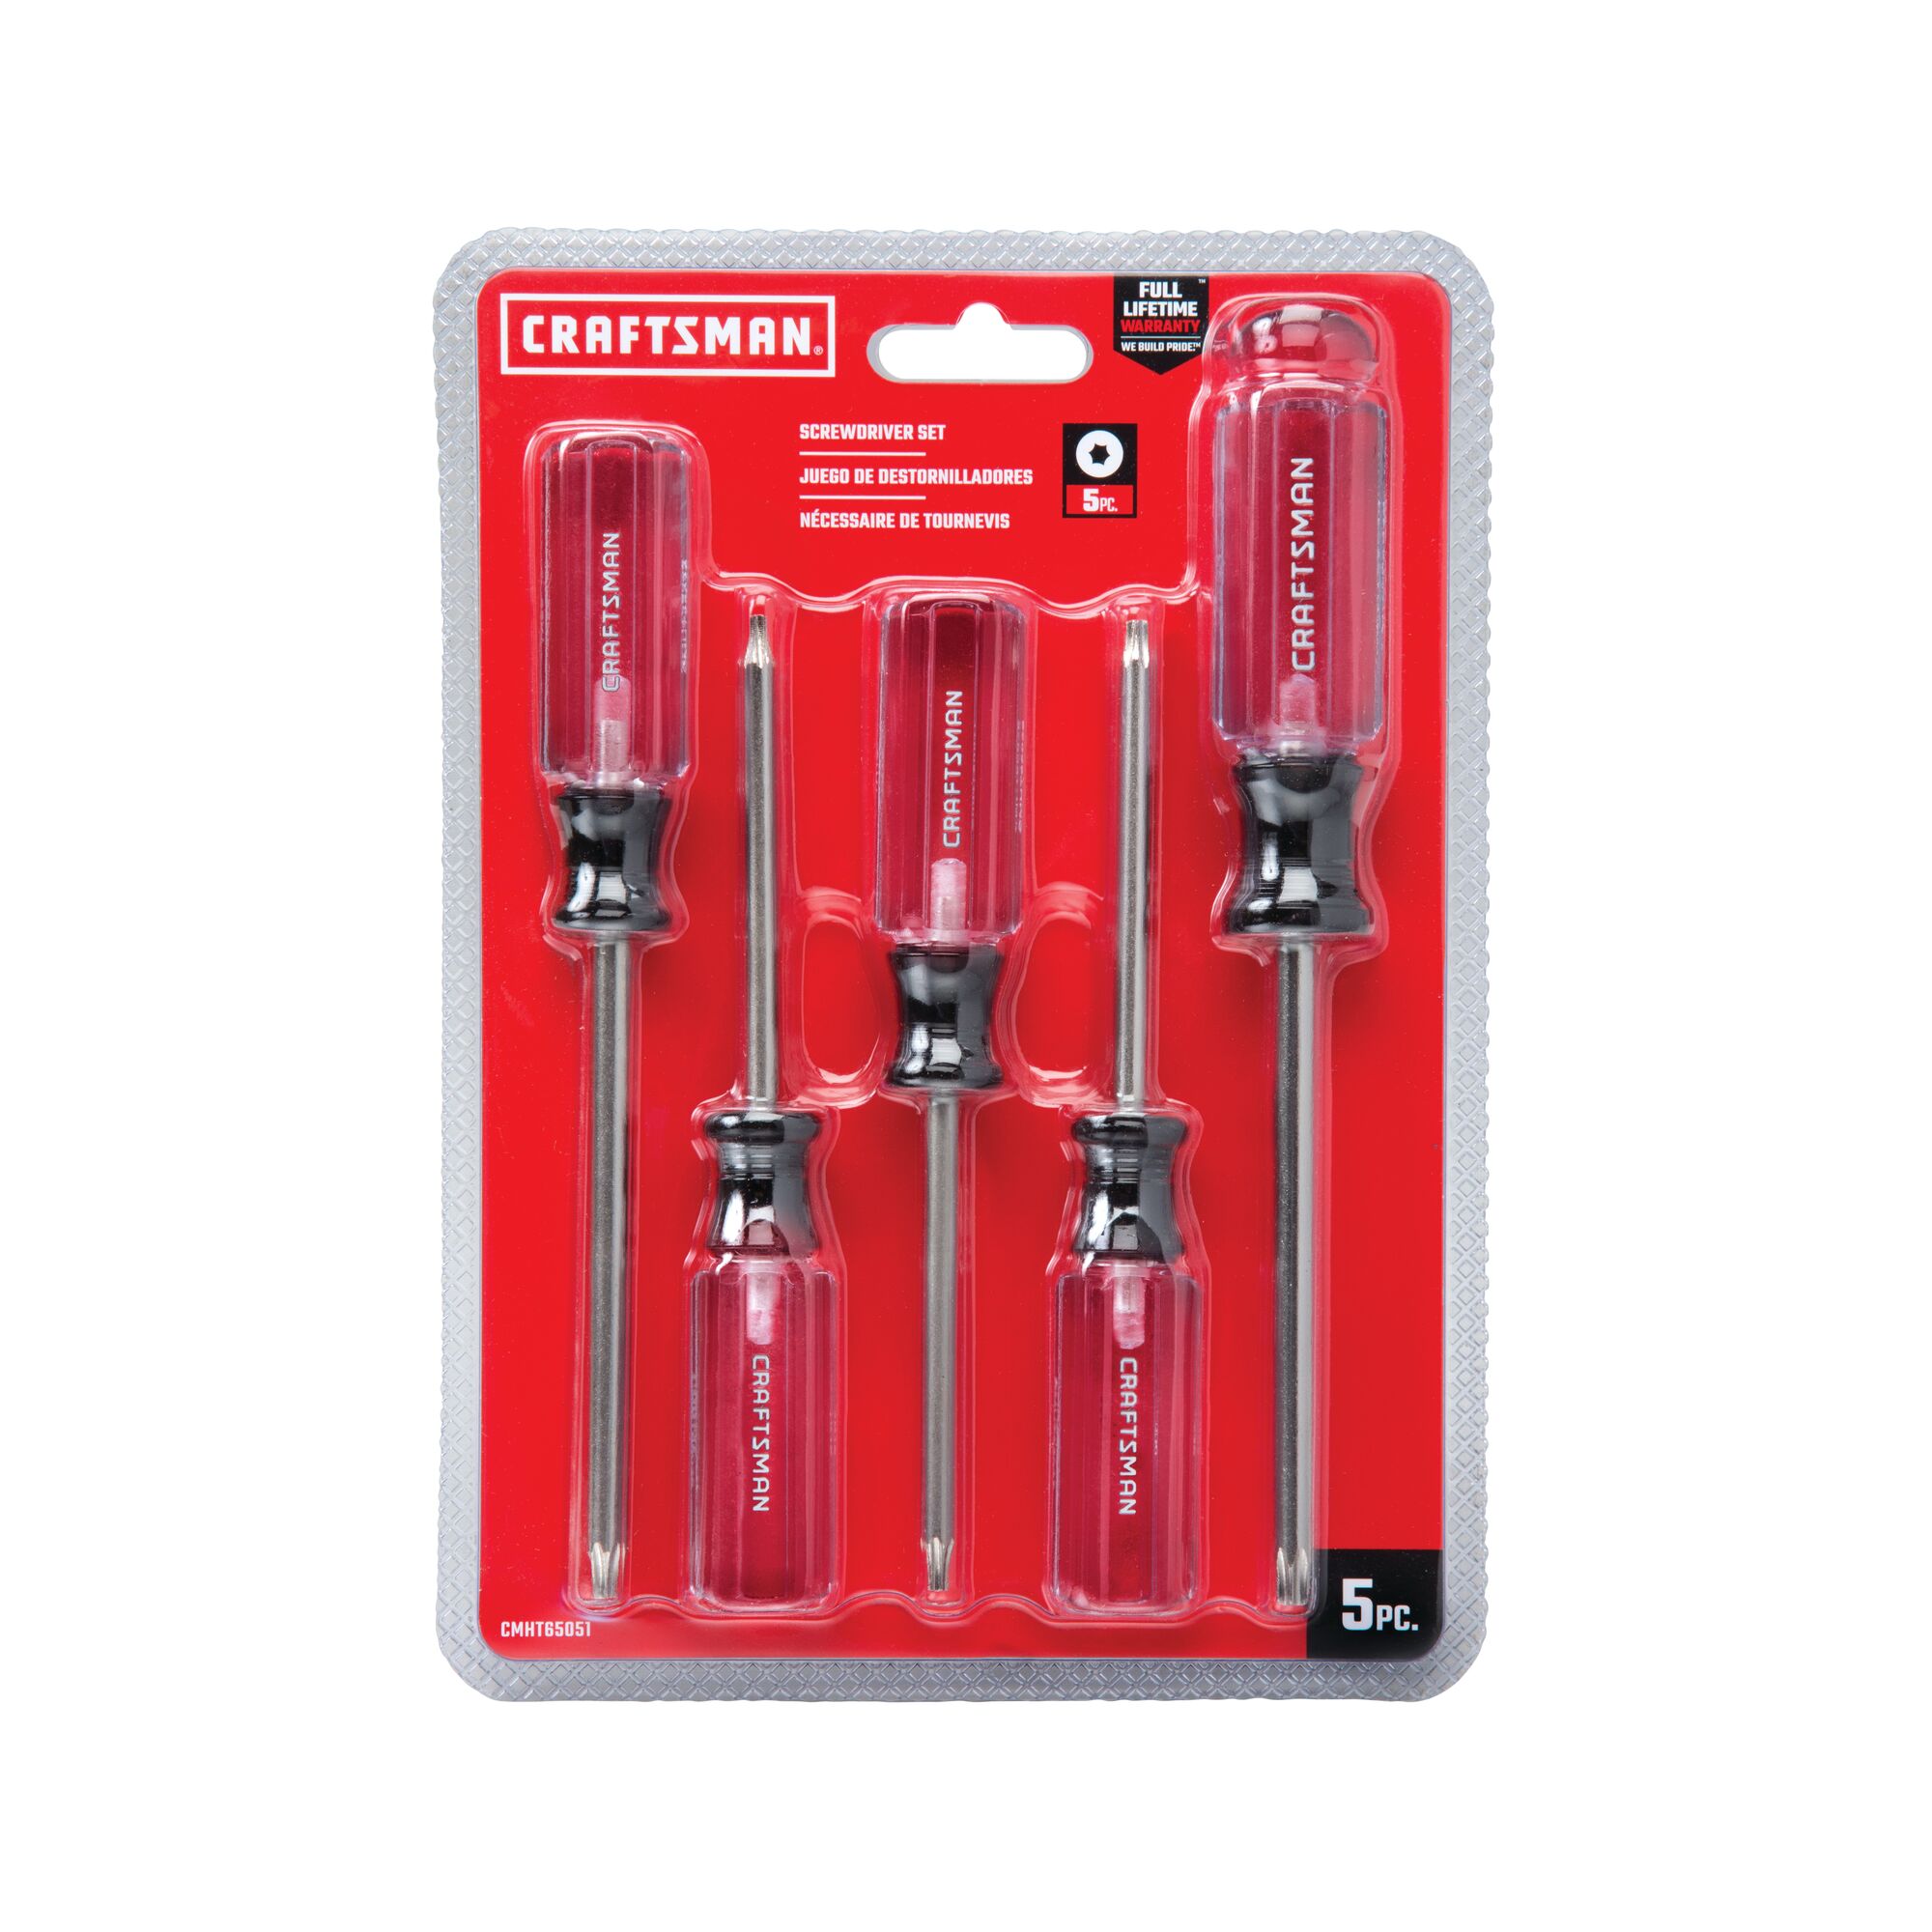 5 piece Torx Acetate ScrewDriver Set in carded blister packaging.